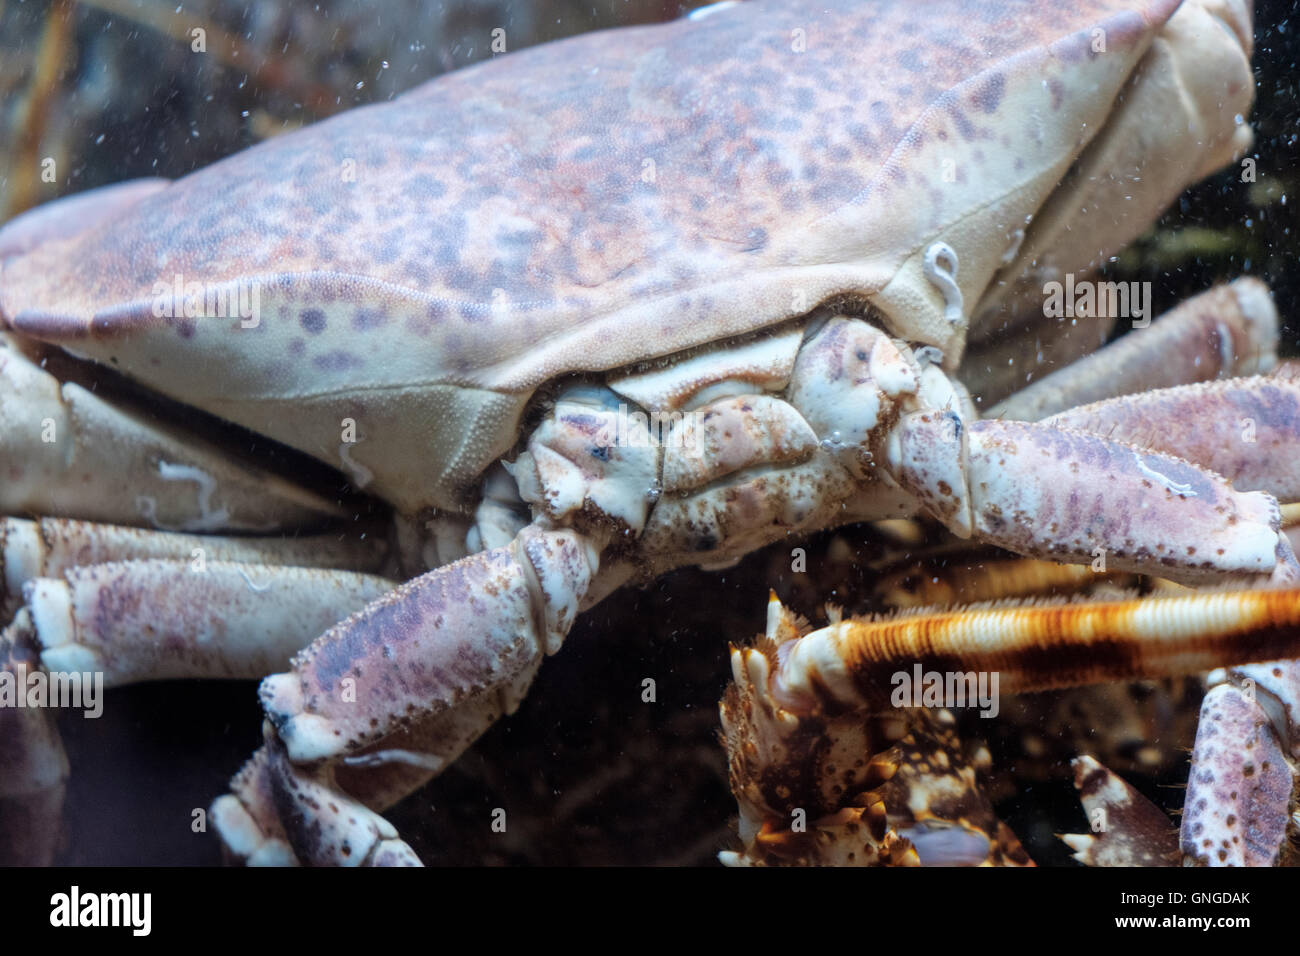 A live crab in a restaurant fish-tank, Cascais, Portugal Stock Photo